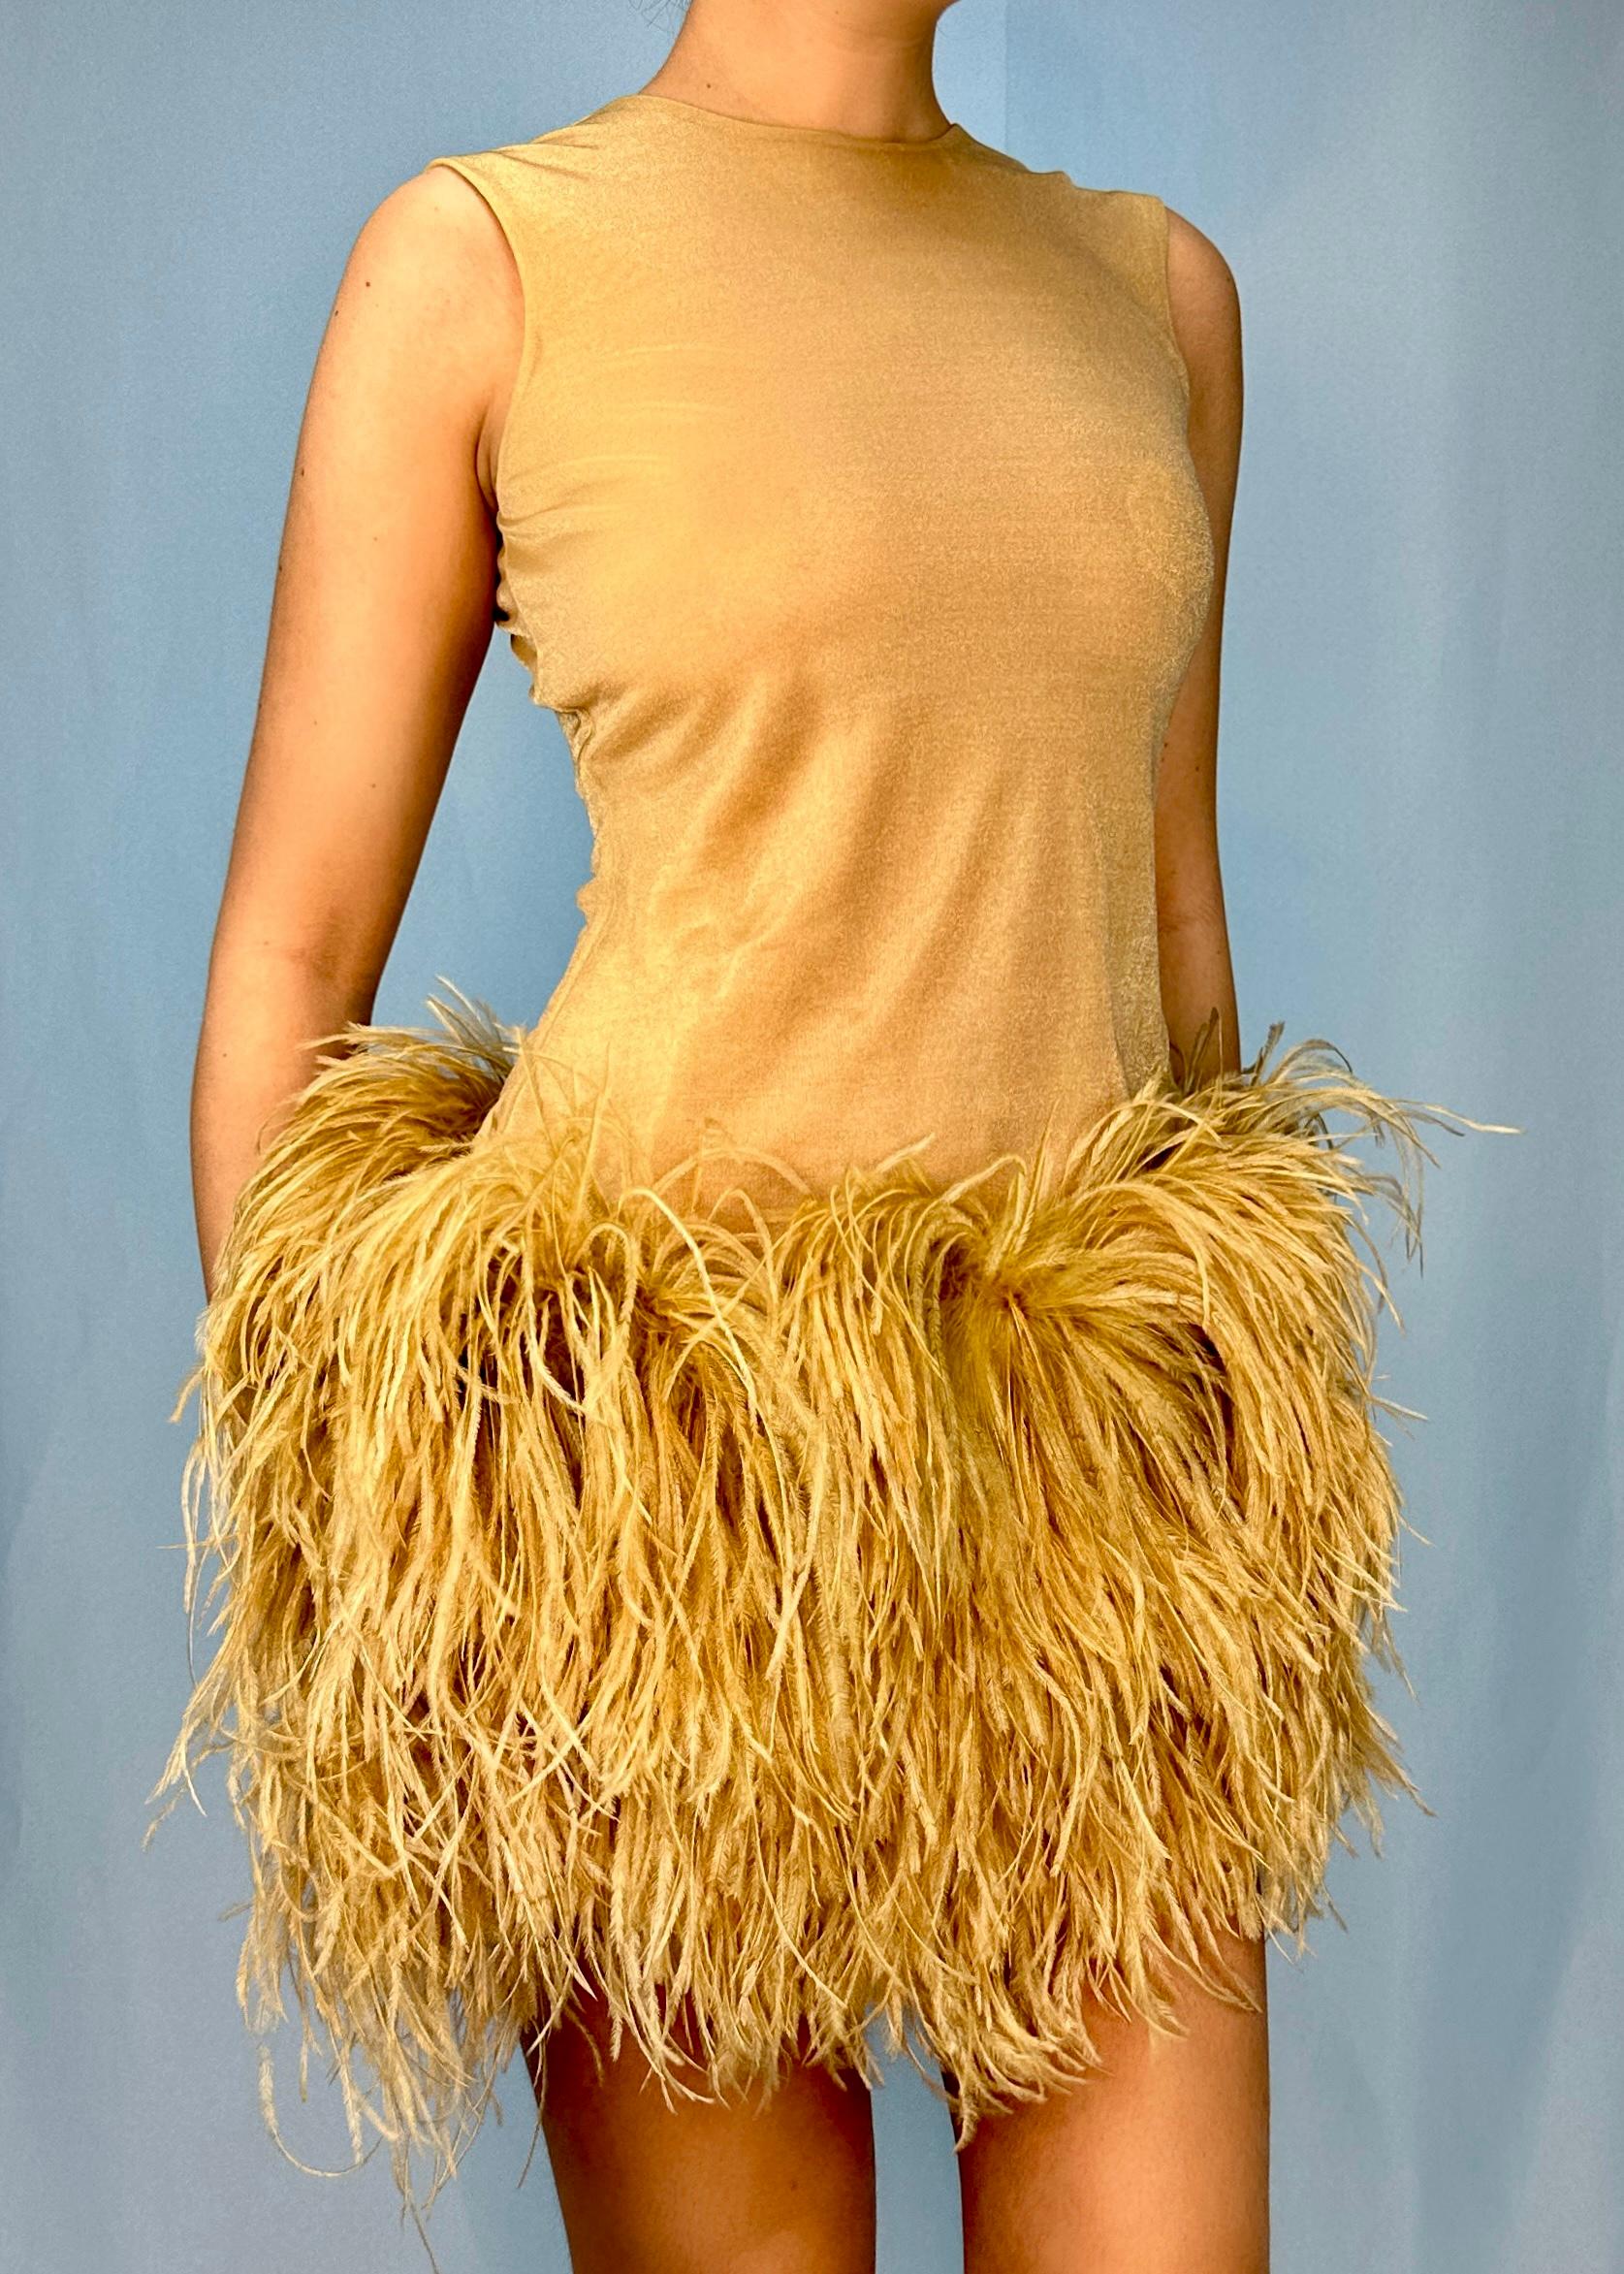 Helmut Lang Fall 1990 Runway Feather Trim Dress In New Condition For Sale In Hertfordshire, GB